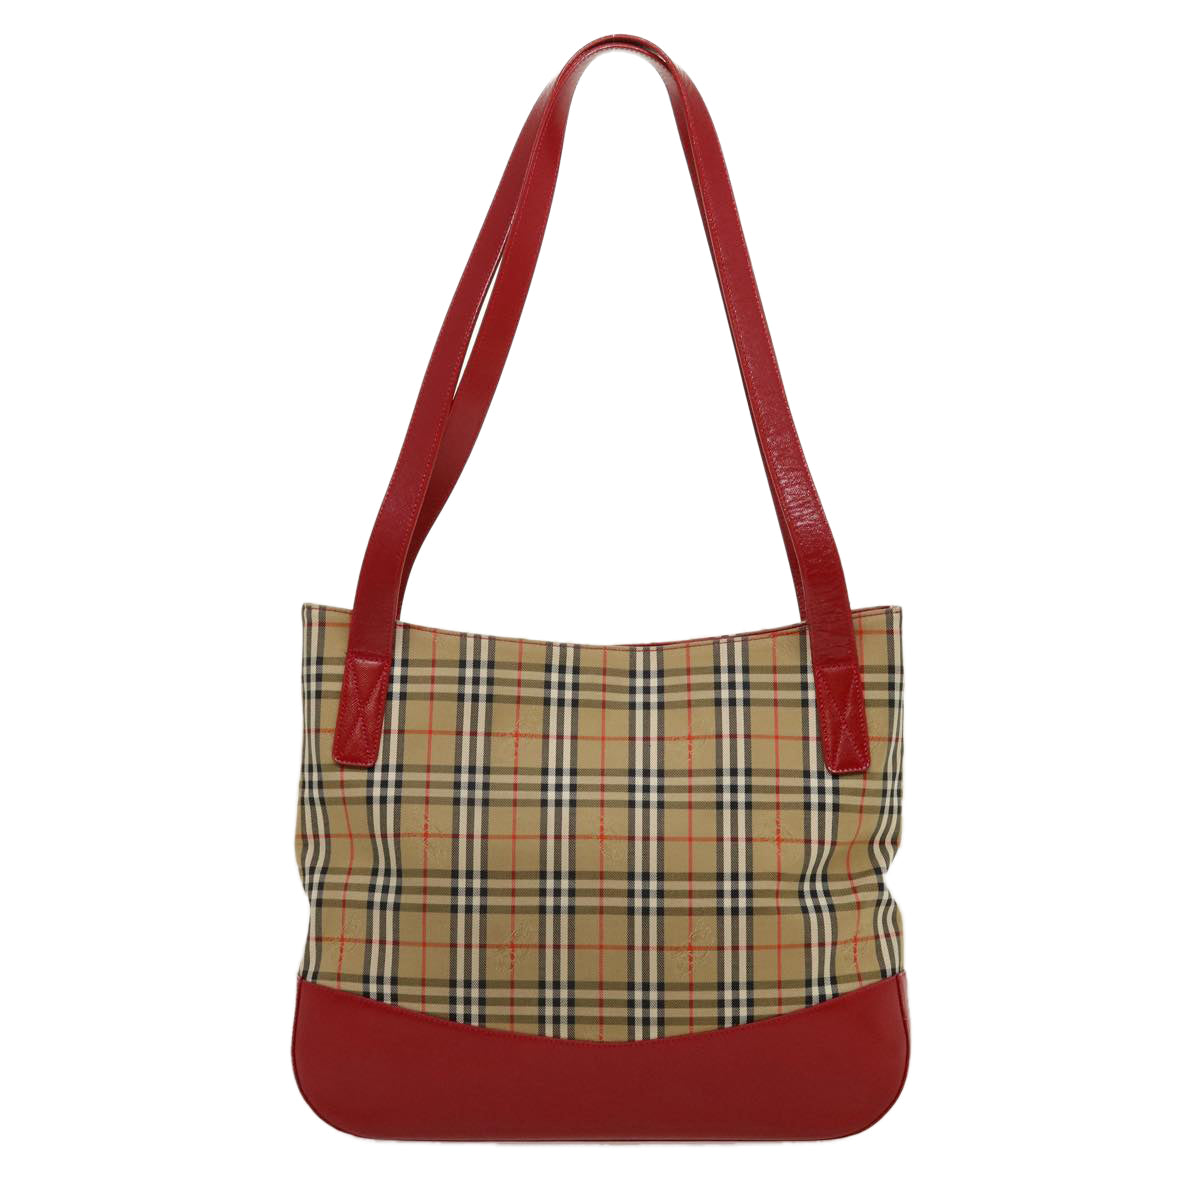 Burberrys Nova Check Tote Bag Canvas Leather Beige Red Auth rd2124 - 0